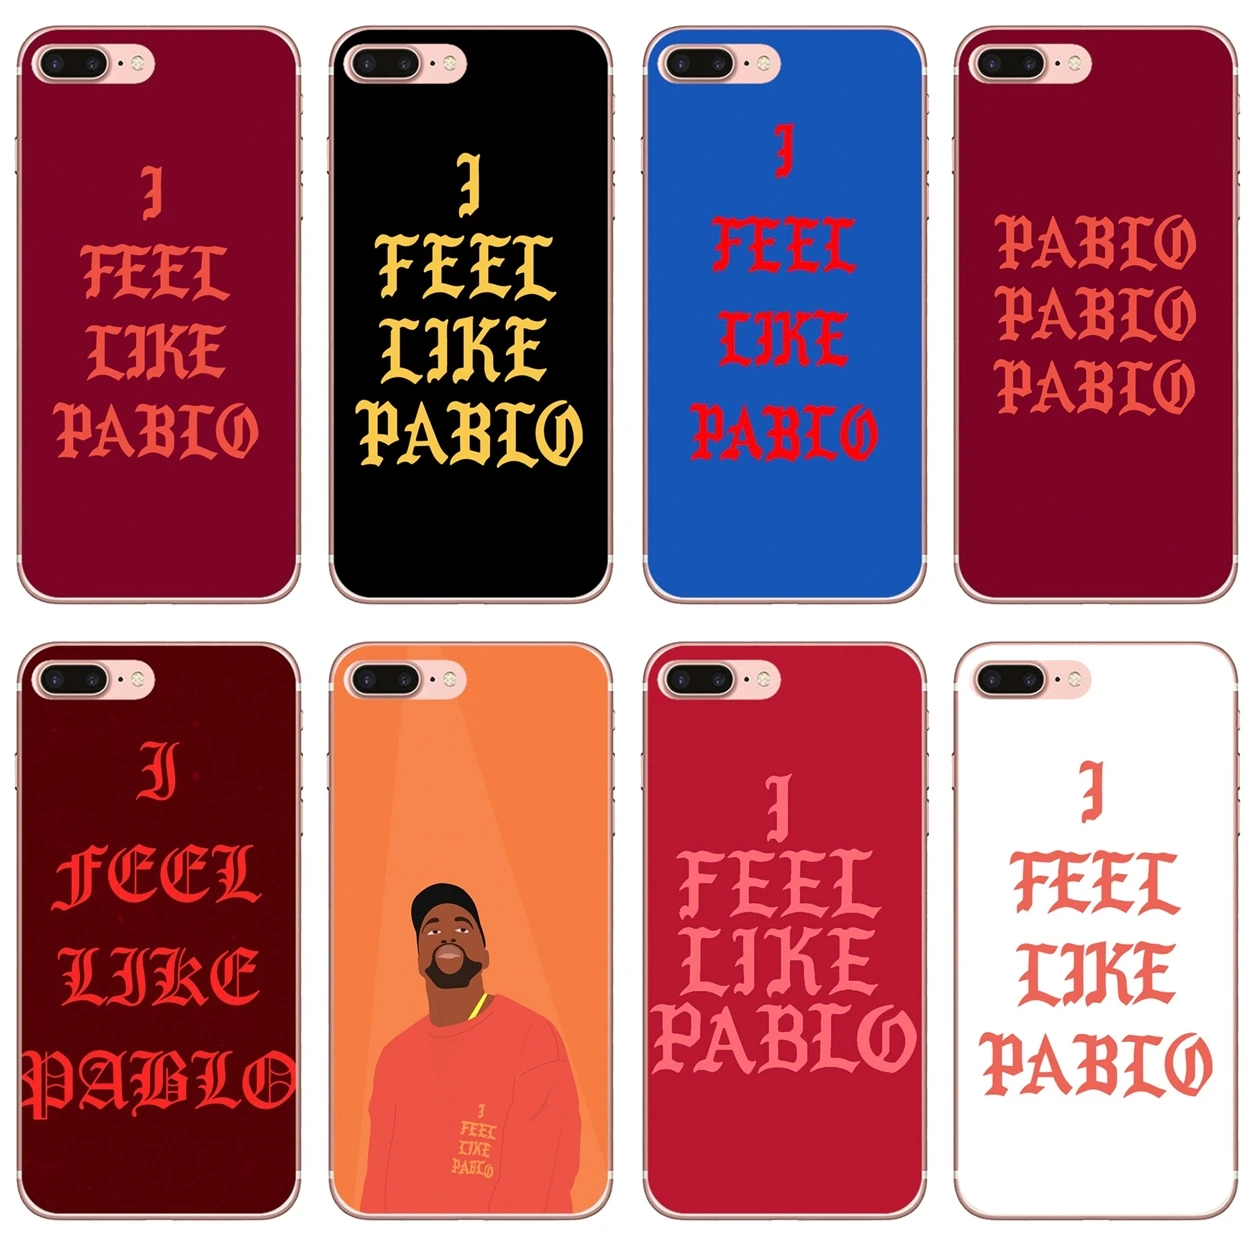 

Soft Case Covers Kanye West I FEEL LIKE PABLO For iPhone 10 11 12 13 Mini Pro 4S 5S SE 5C 6 6S 7 8 X XR XS Plus Max 2020